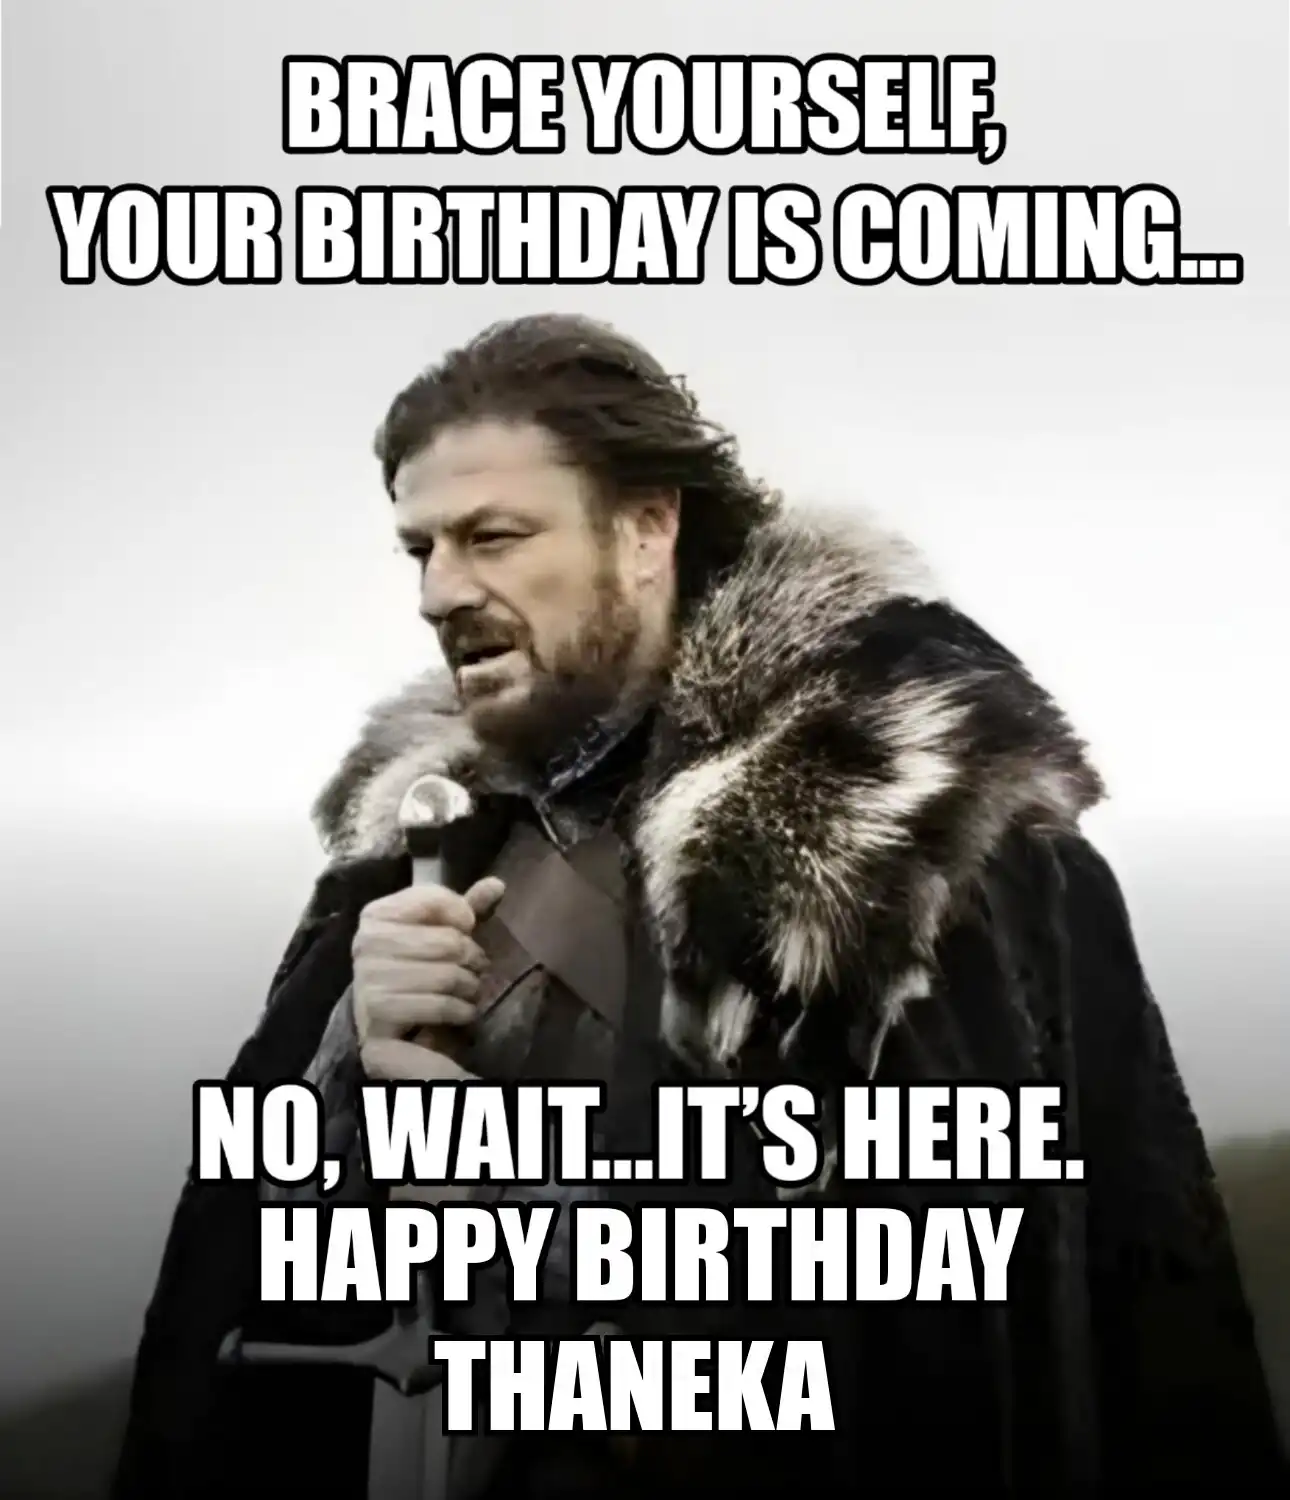 Happy Birthday Thaneka Brace Yourself Your Birthday Is Coming Meme